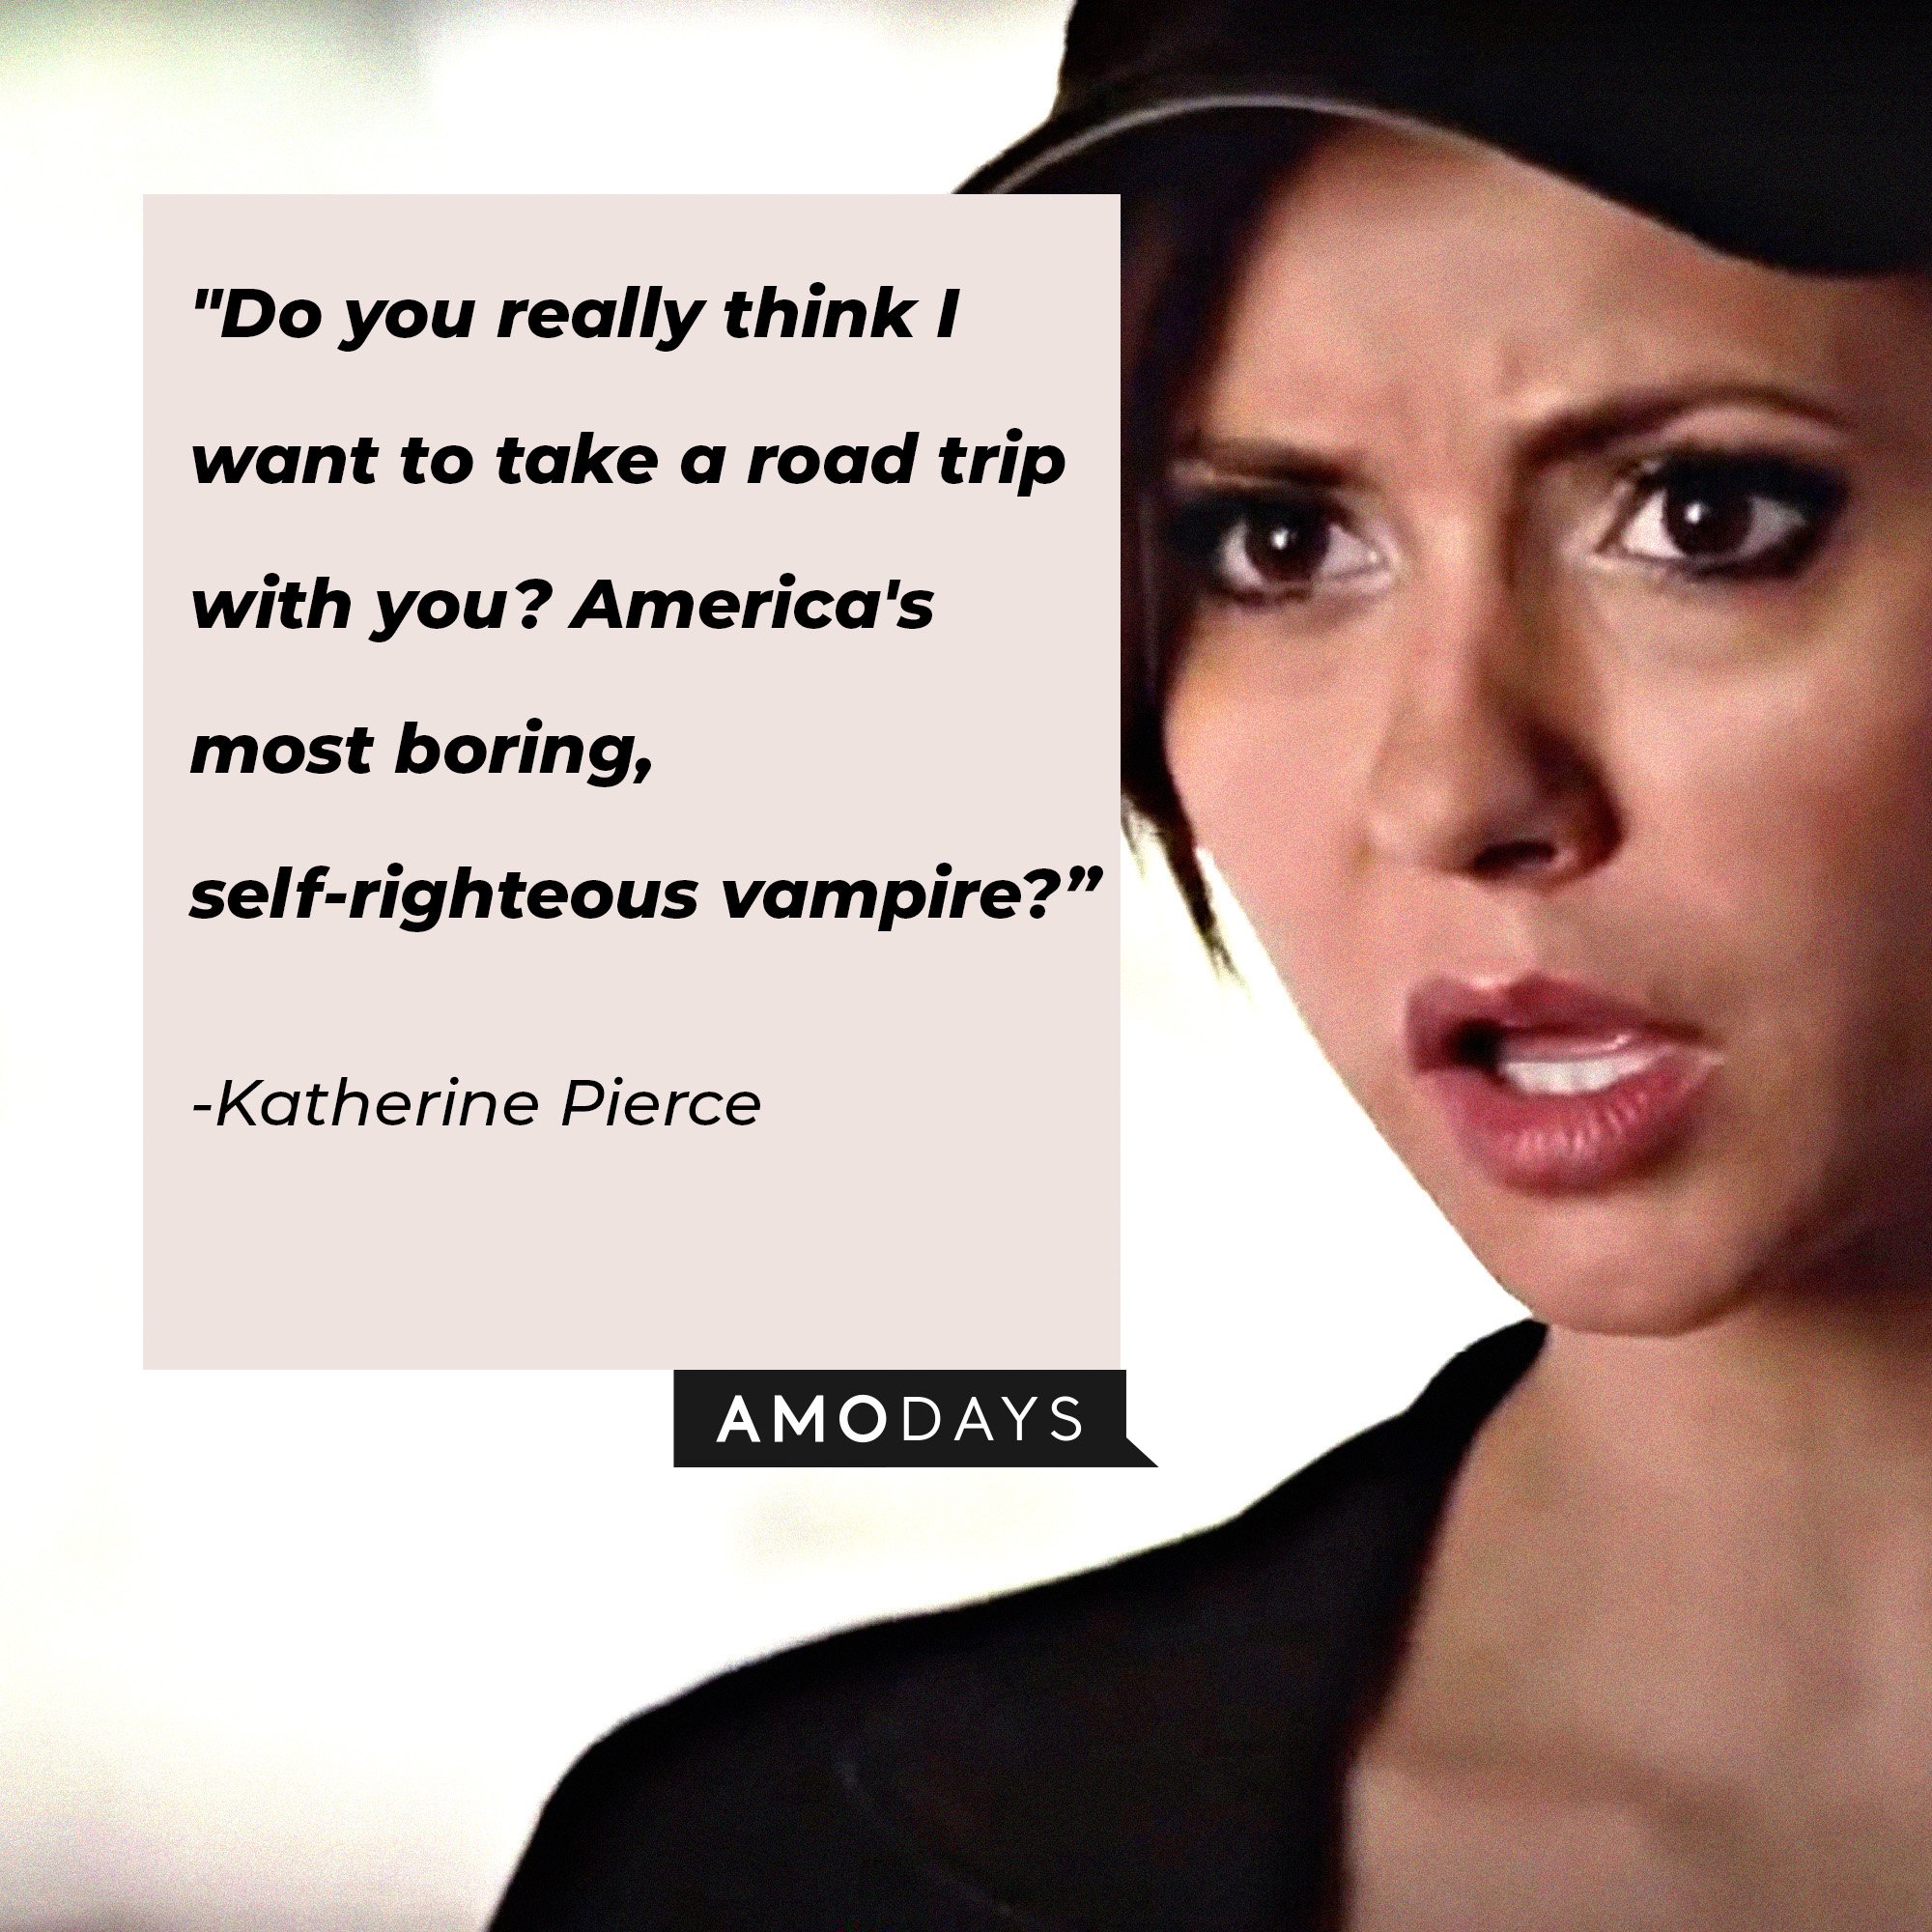 Katherine Pierce's quote: "Do you really think I want to take a road trip with you? America's most boring, self-righteous vampire?" | Image: AmoDays